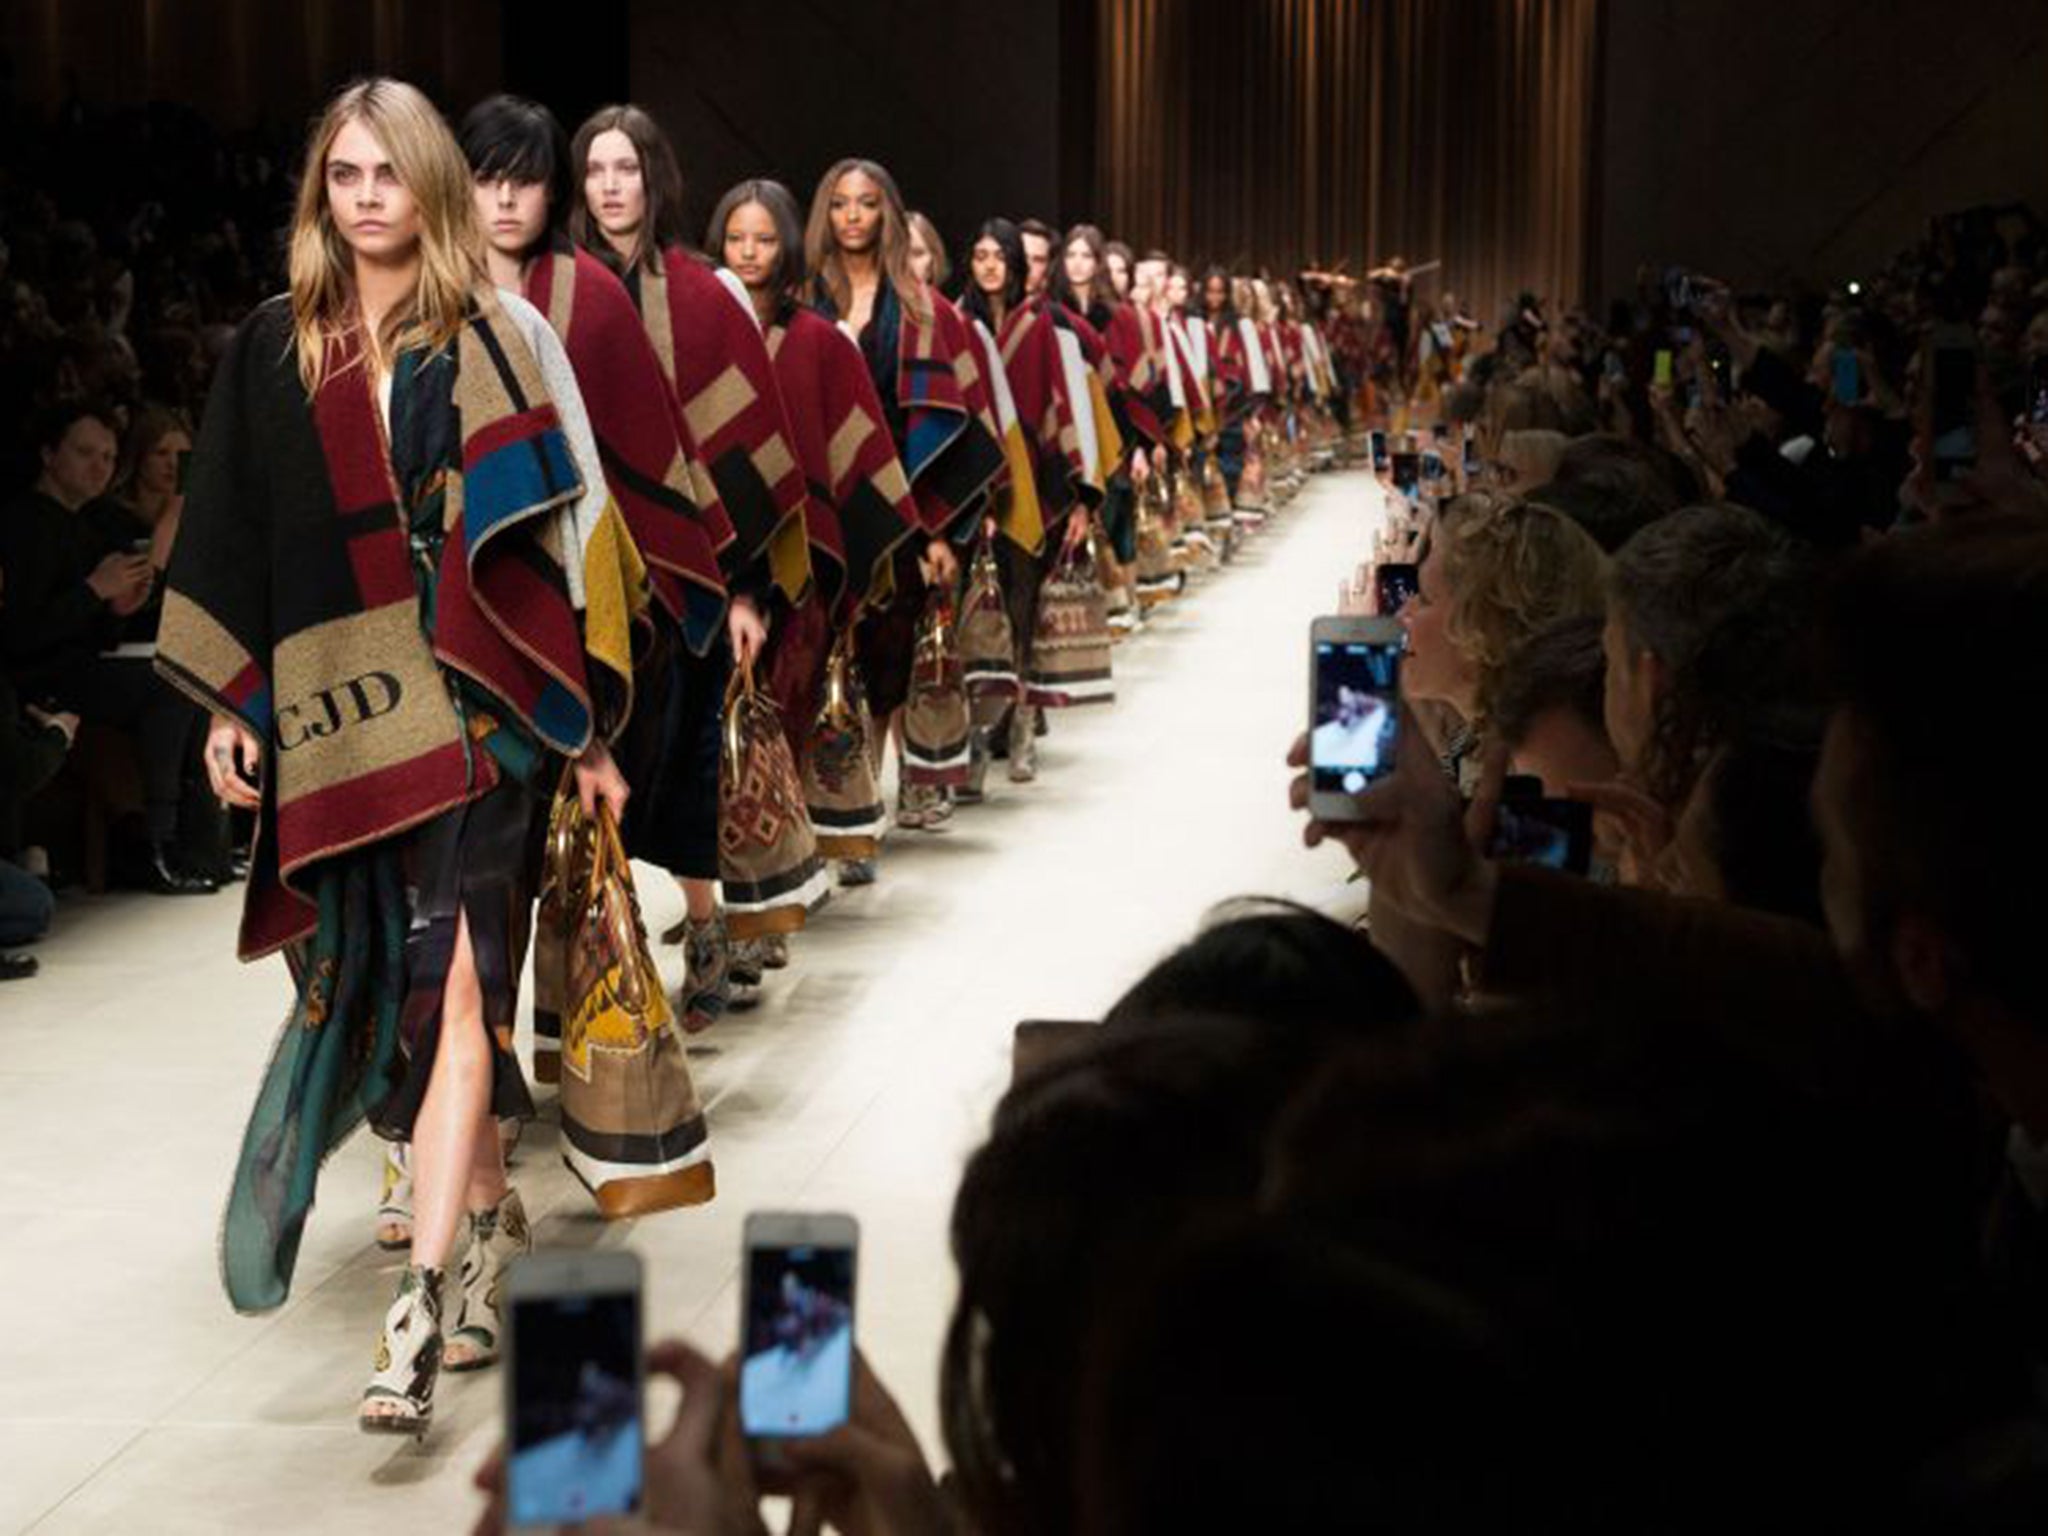 Cara Delevingne sports a monogramed blanket in the A/W 15 Burberry Prorsum show